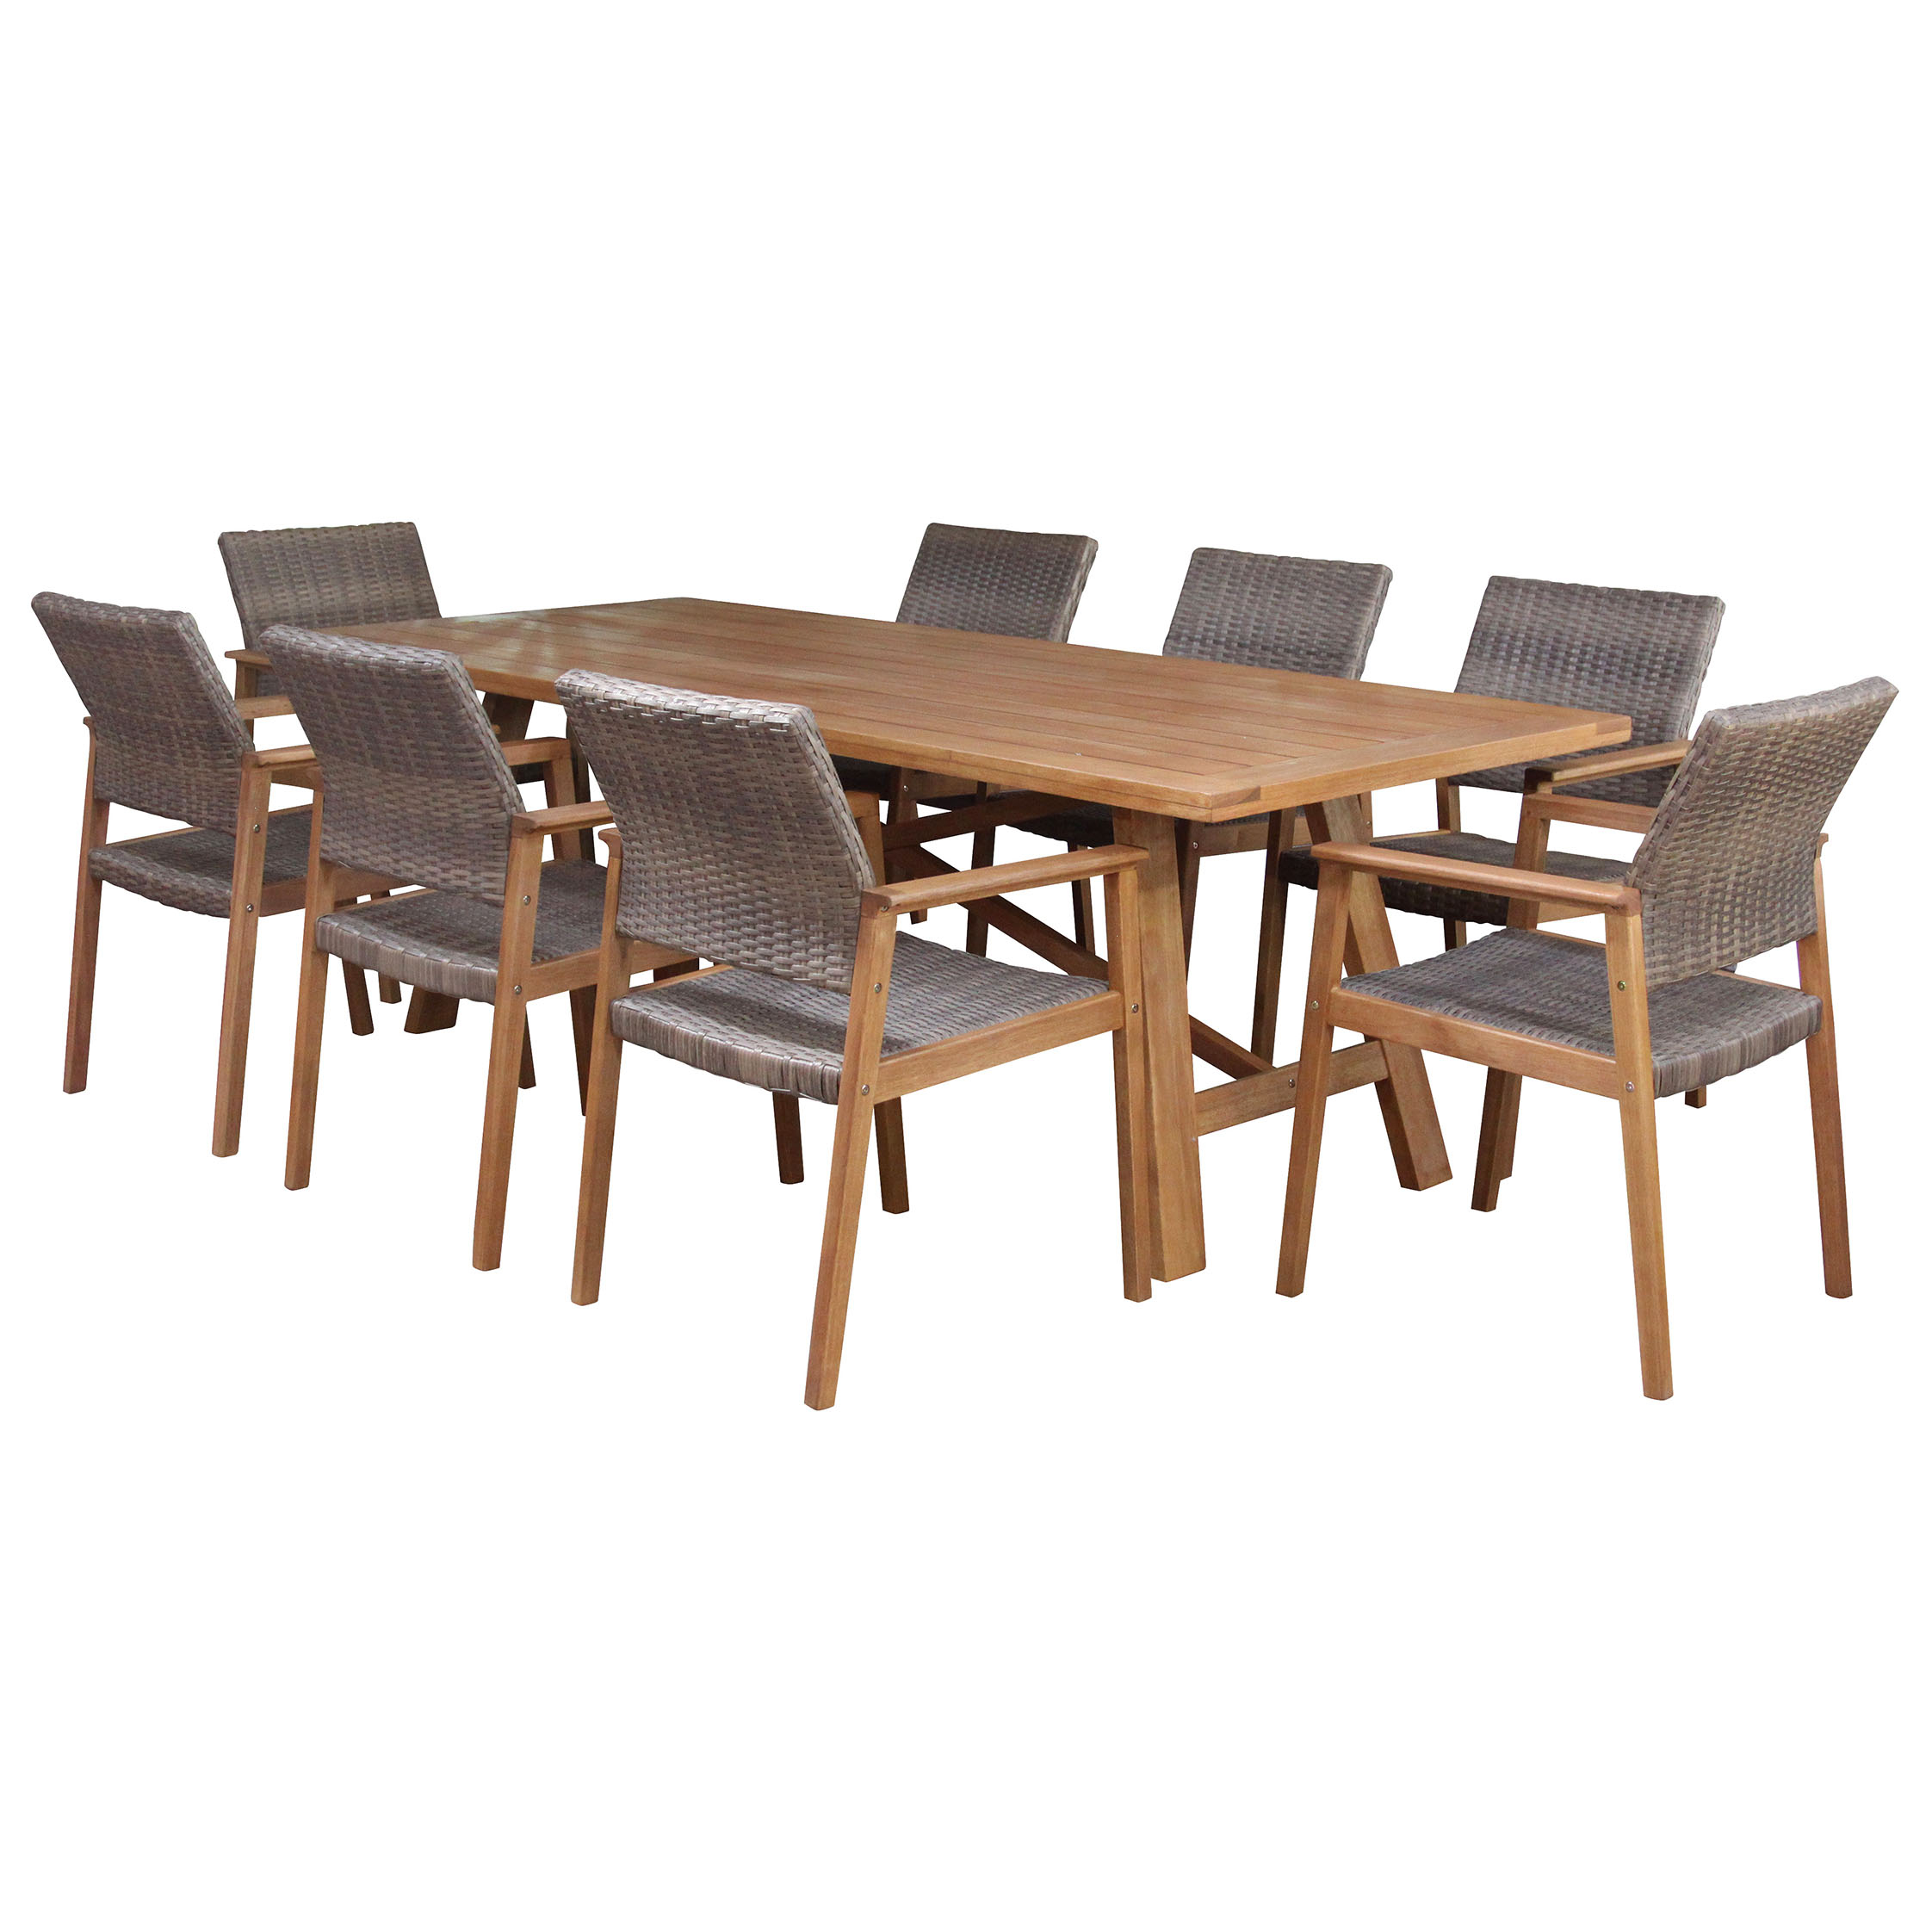 Cascade Set 8 Seater With Capri Wood And Wicker Chairs with dimensions 2244 X 2244